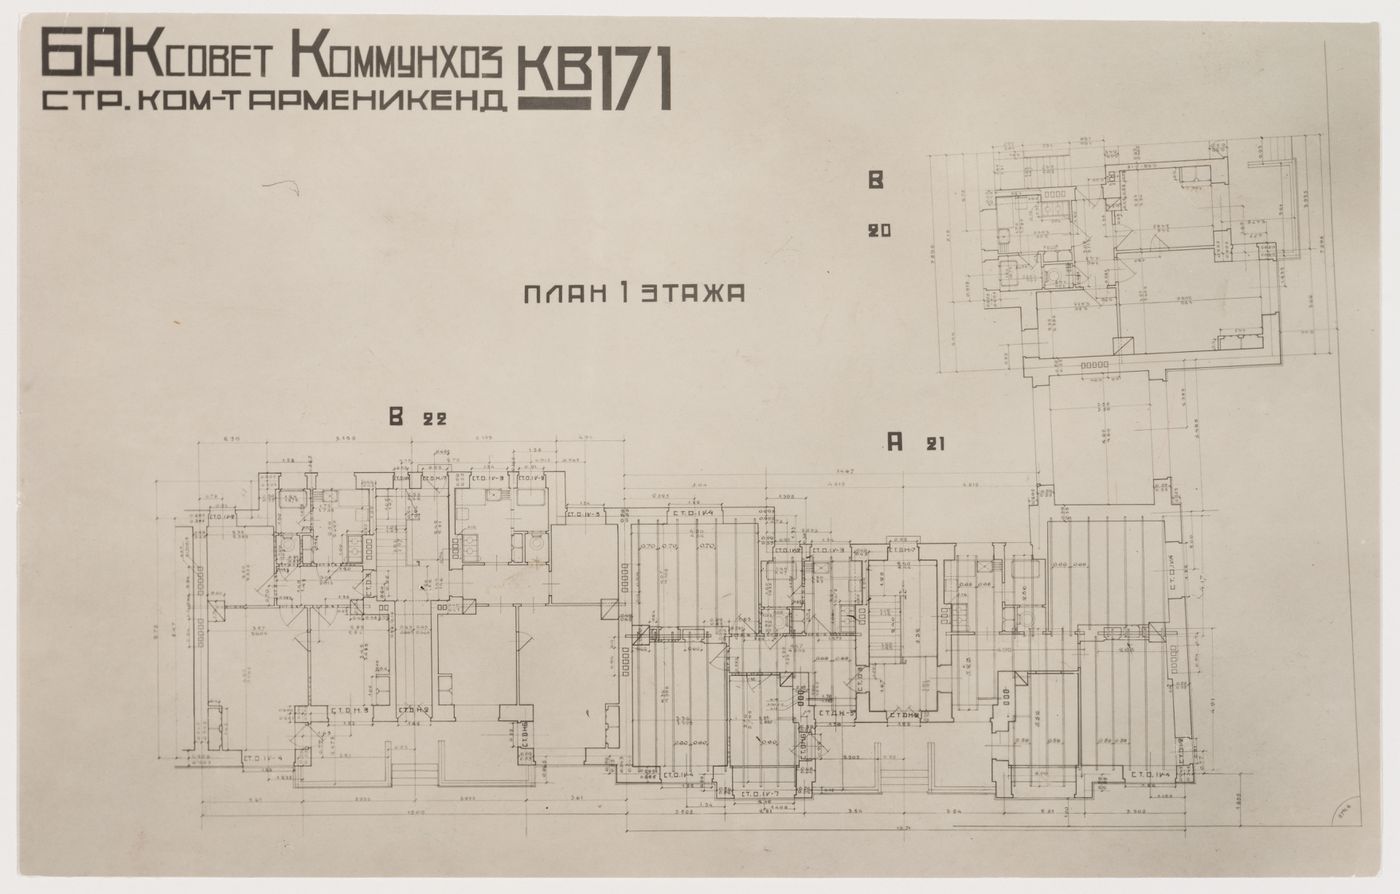 Photograph of the typical first floor plan for housing, Armenikend (Shaumian) settlement, Baku, Soviet Union (now in Azerbaijan)